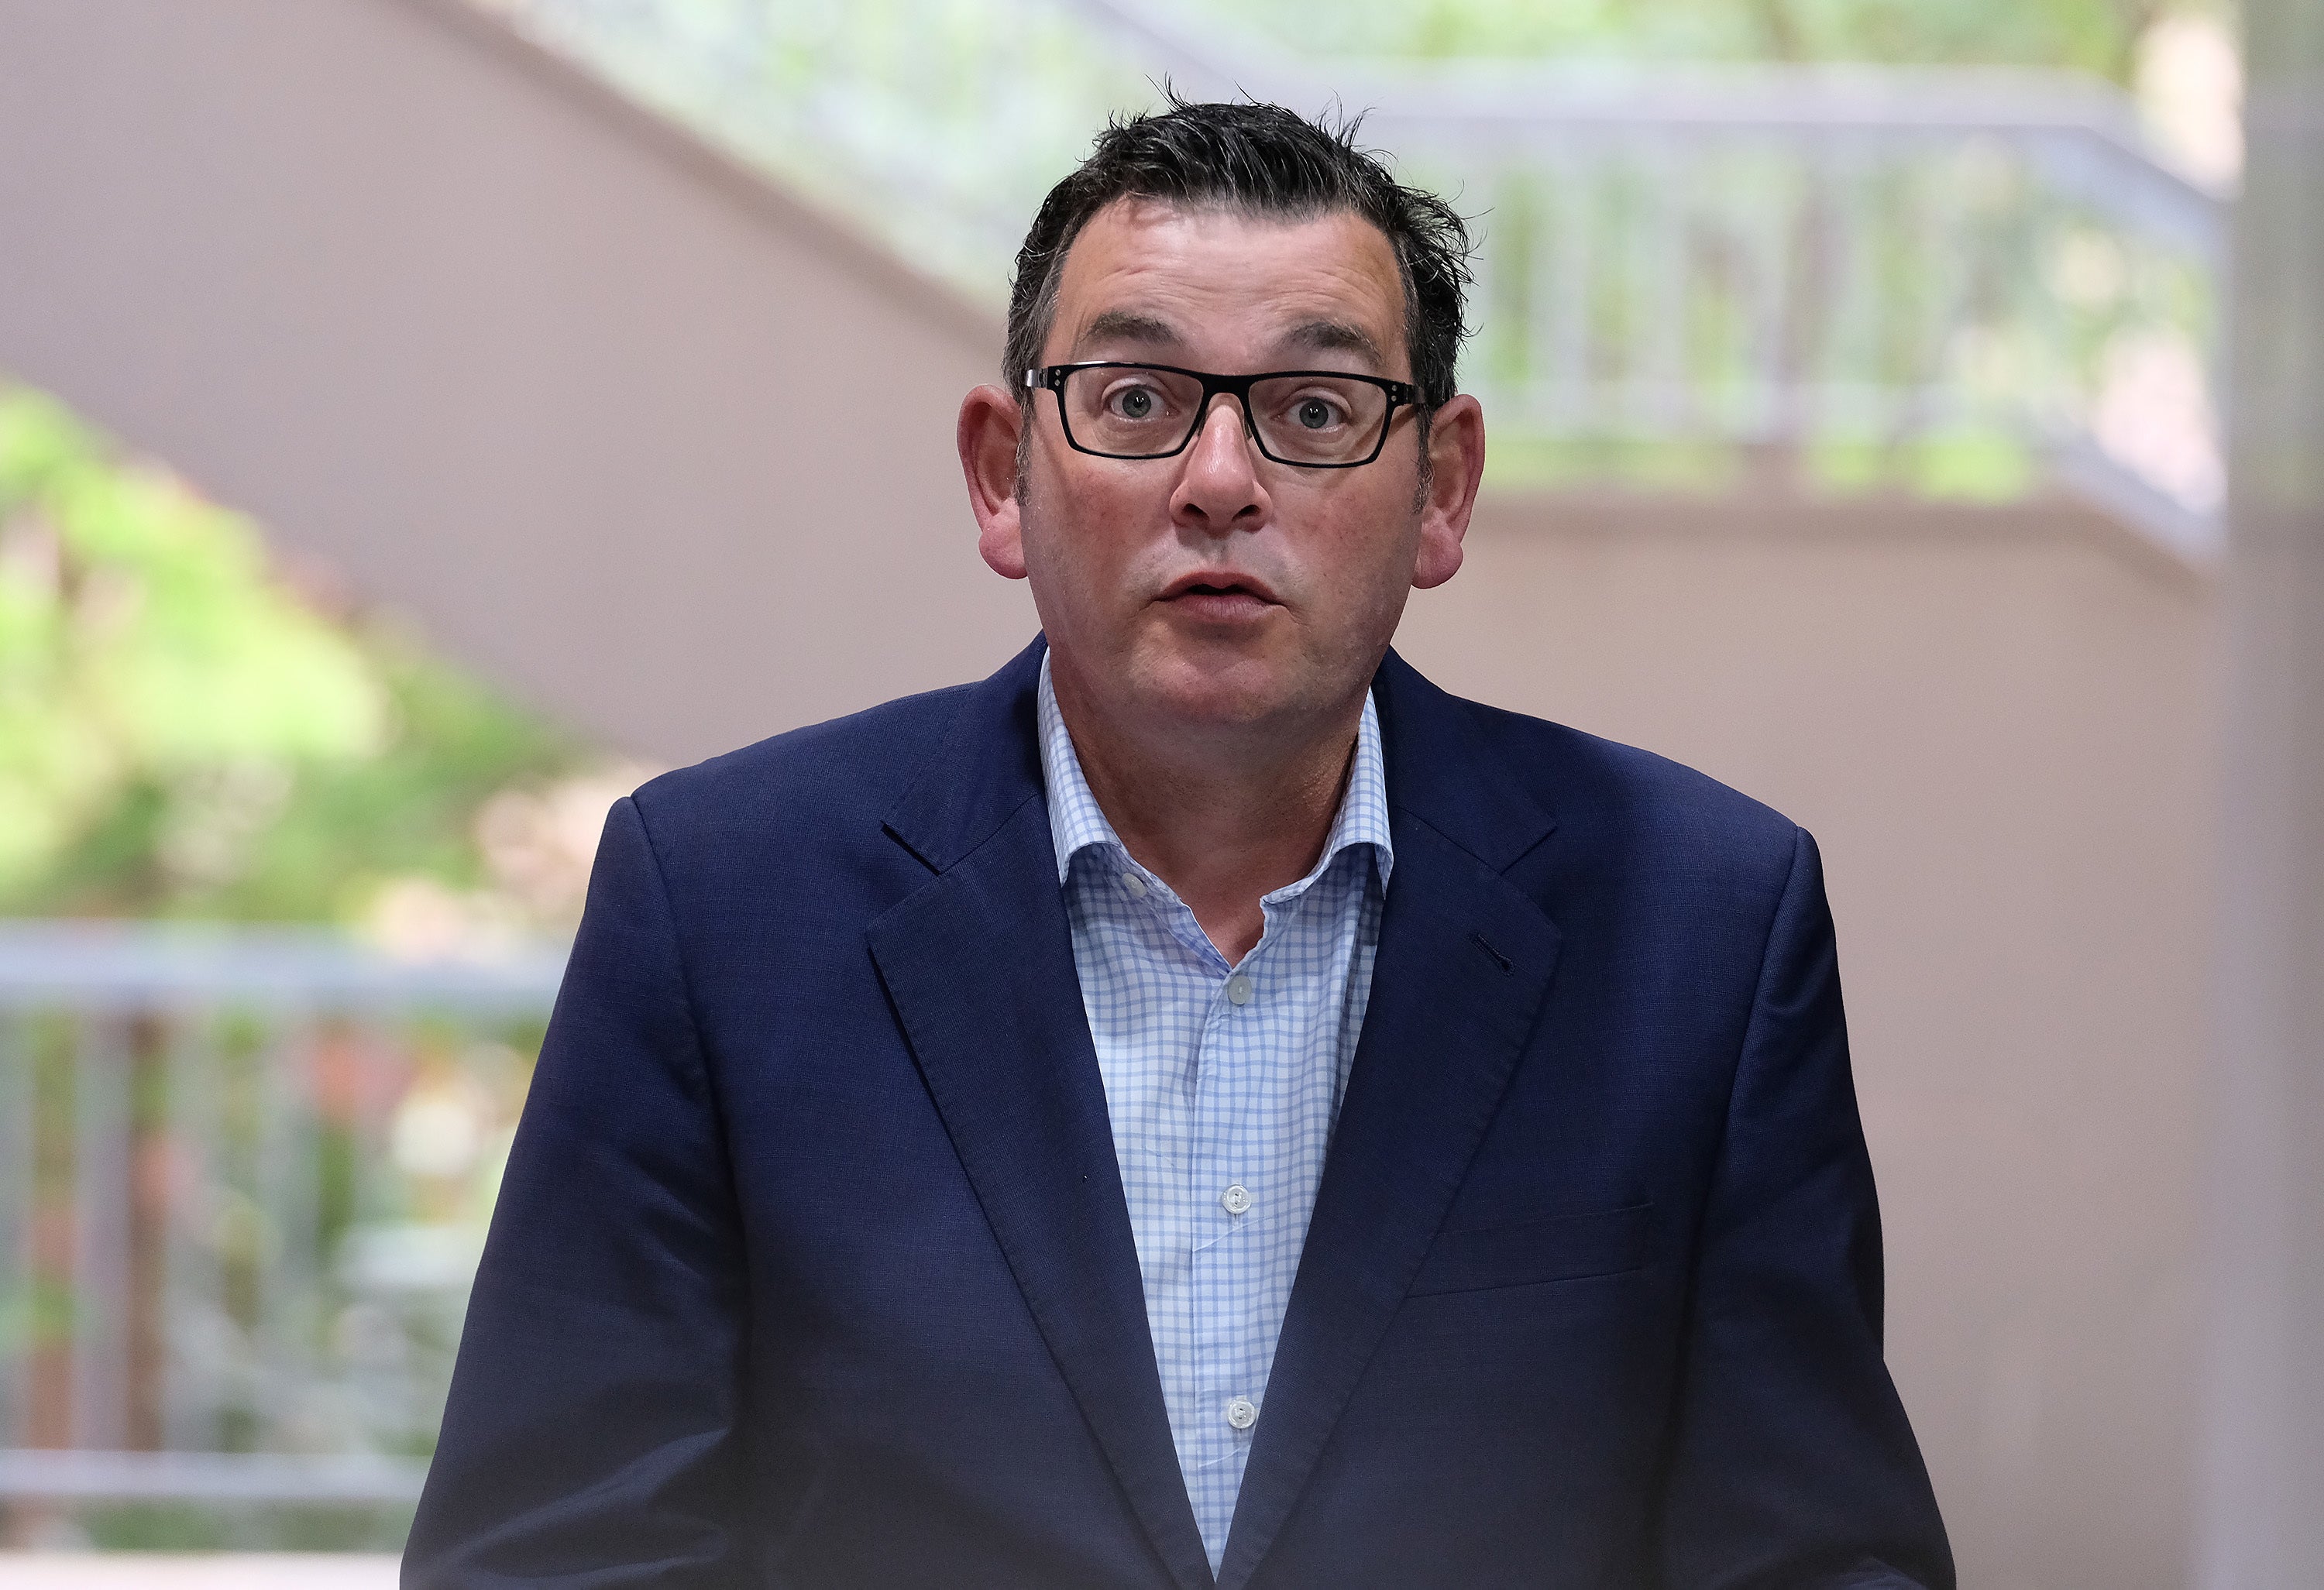 File image: Daniel Andrews has been the permier of Victoria since 2014